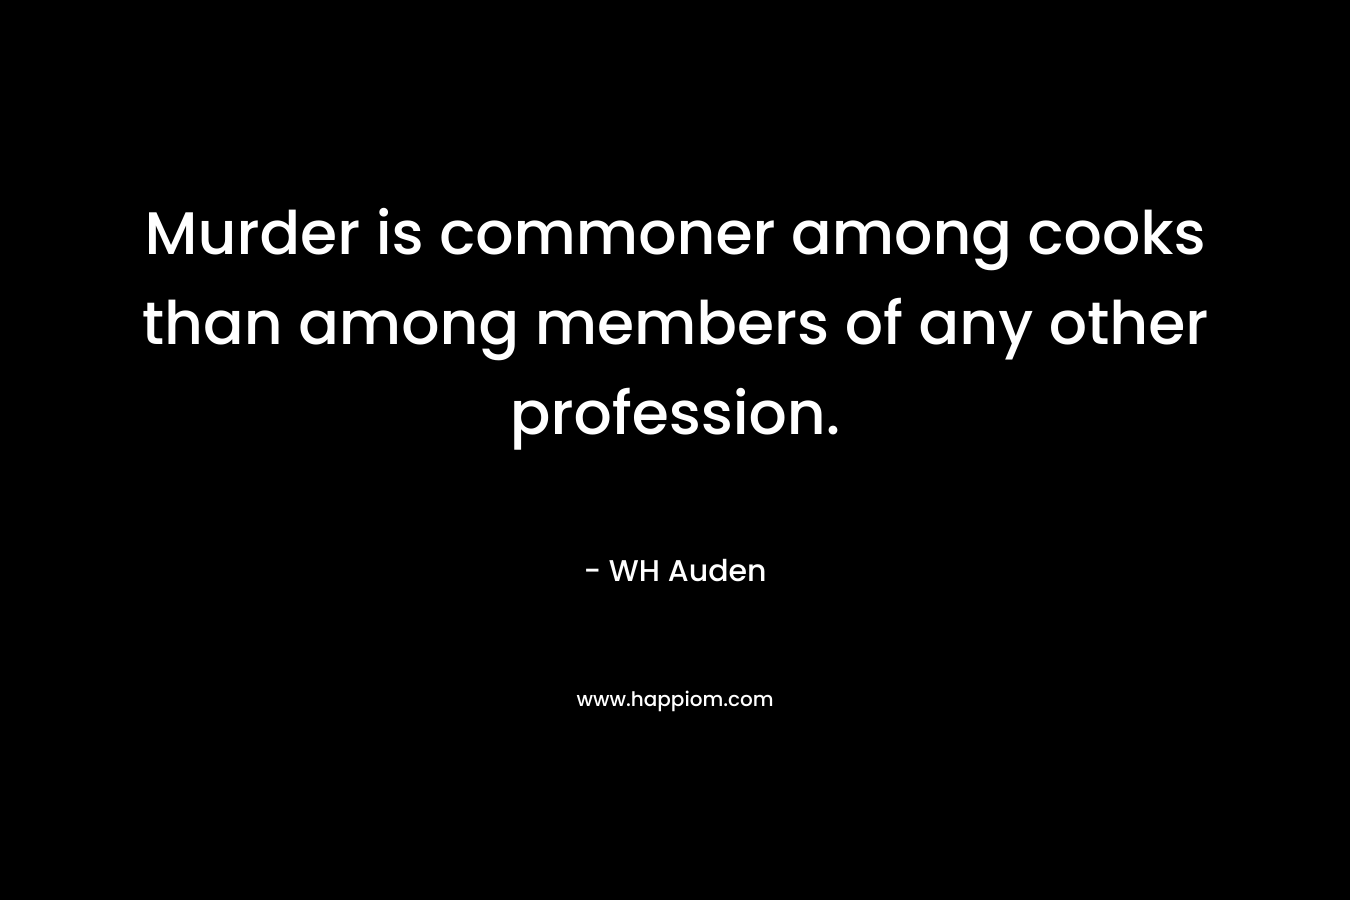 Murder is commoner among cooks than among members of any other profession. – WH Auden